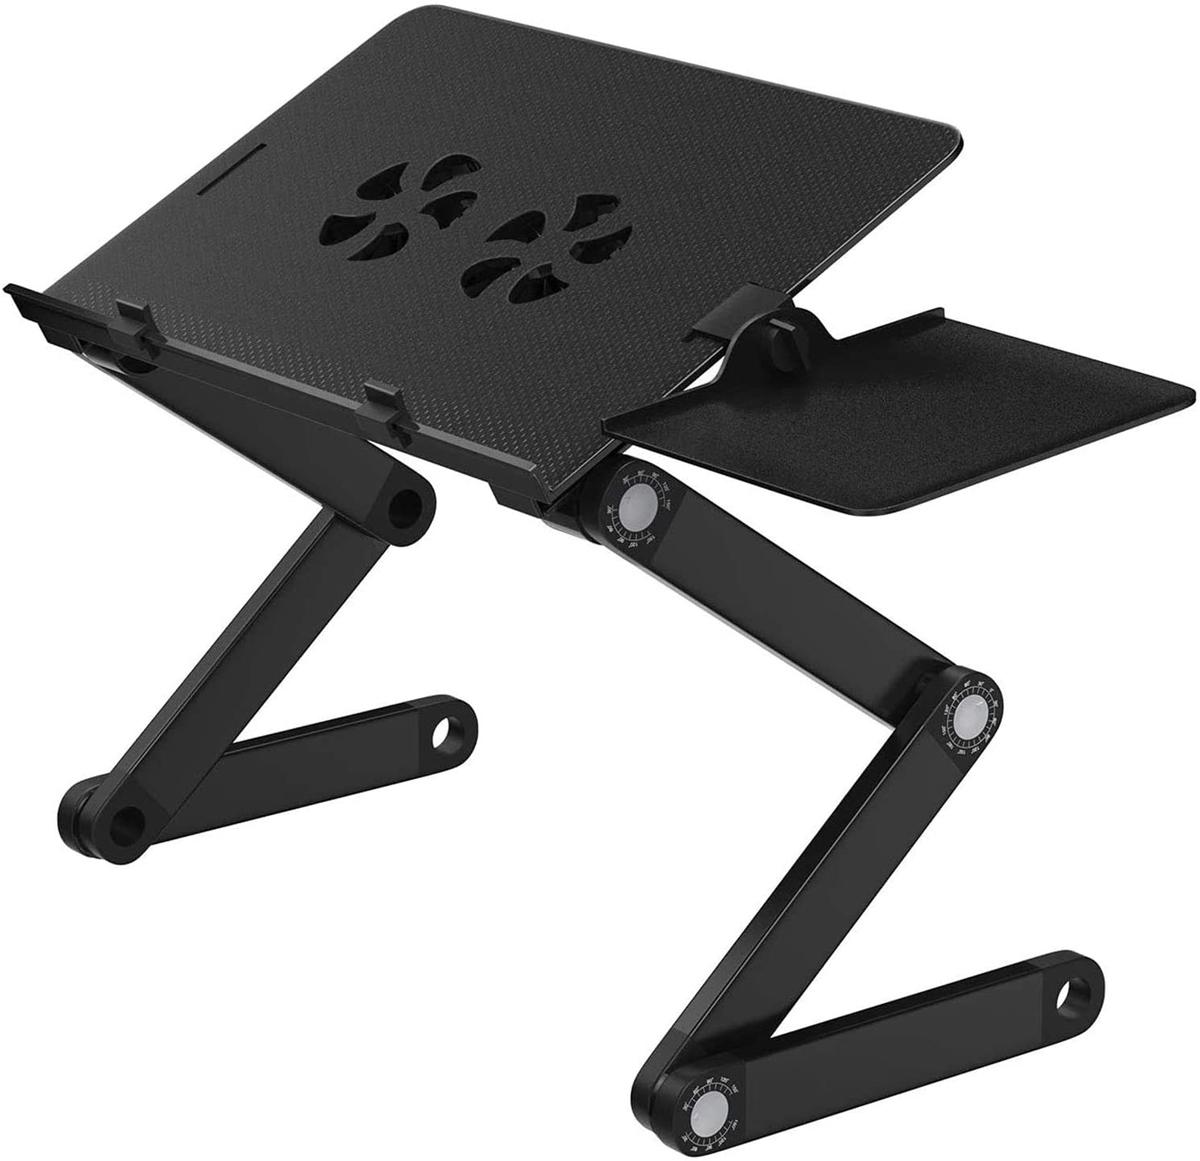 Adjustable Laptop Stand with 2 Cooling Fans for $16.20 Shipped